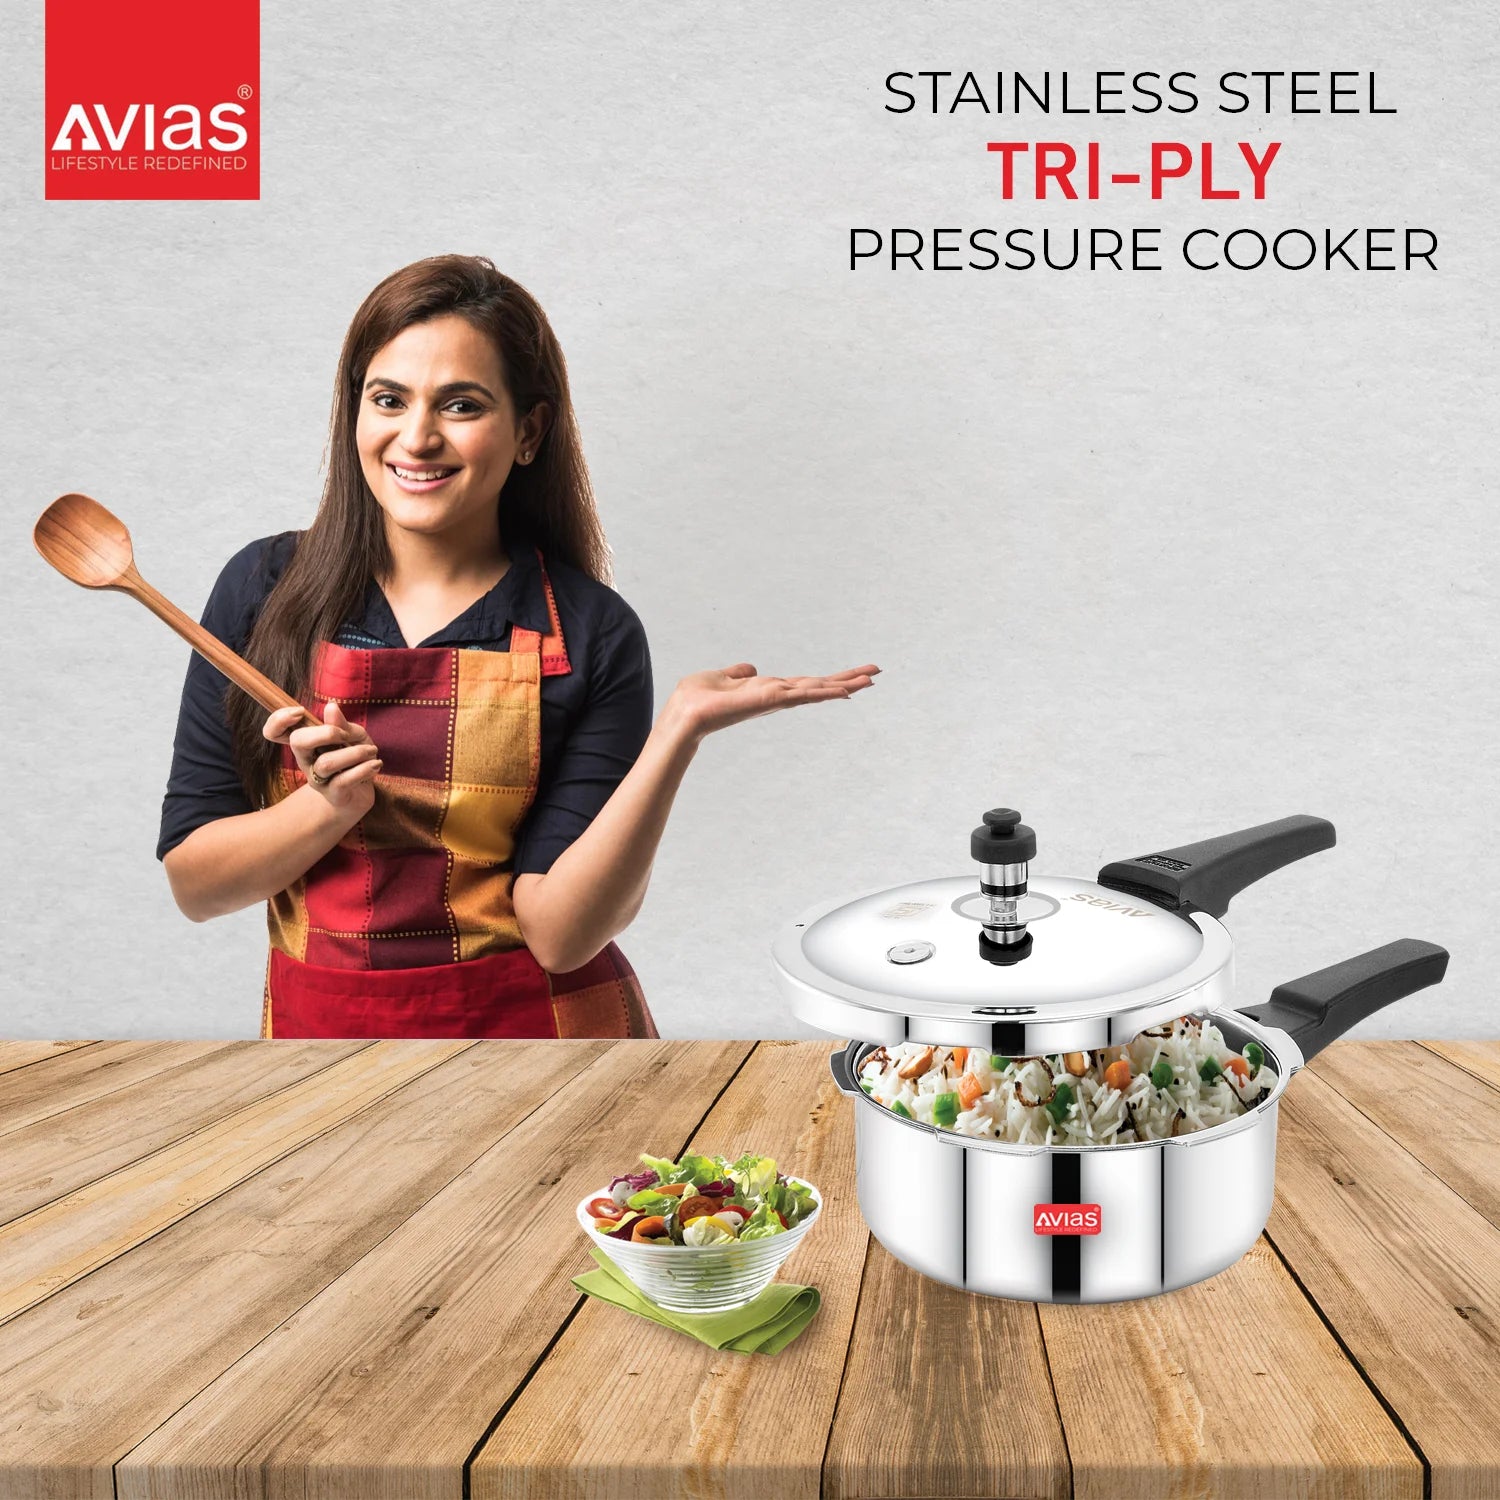 AVIAS Riara Premium Stainless Steel Triply Pressure Cooker with outer lid